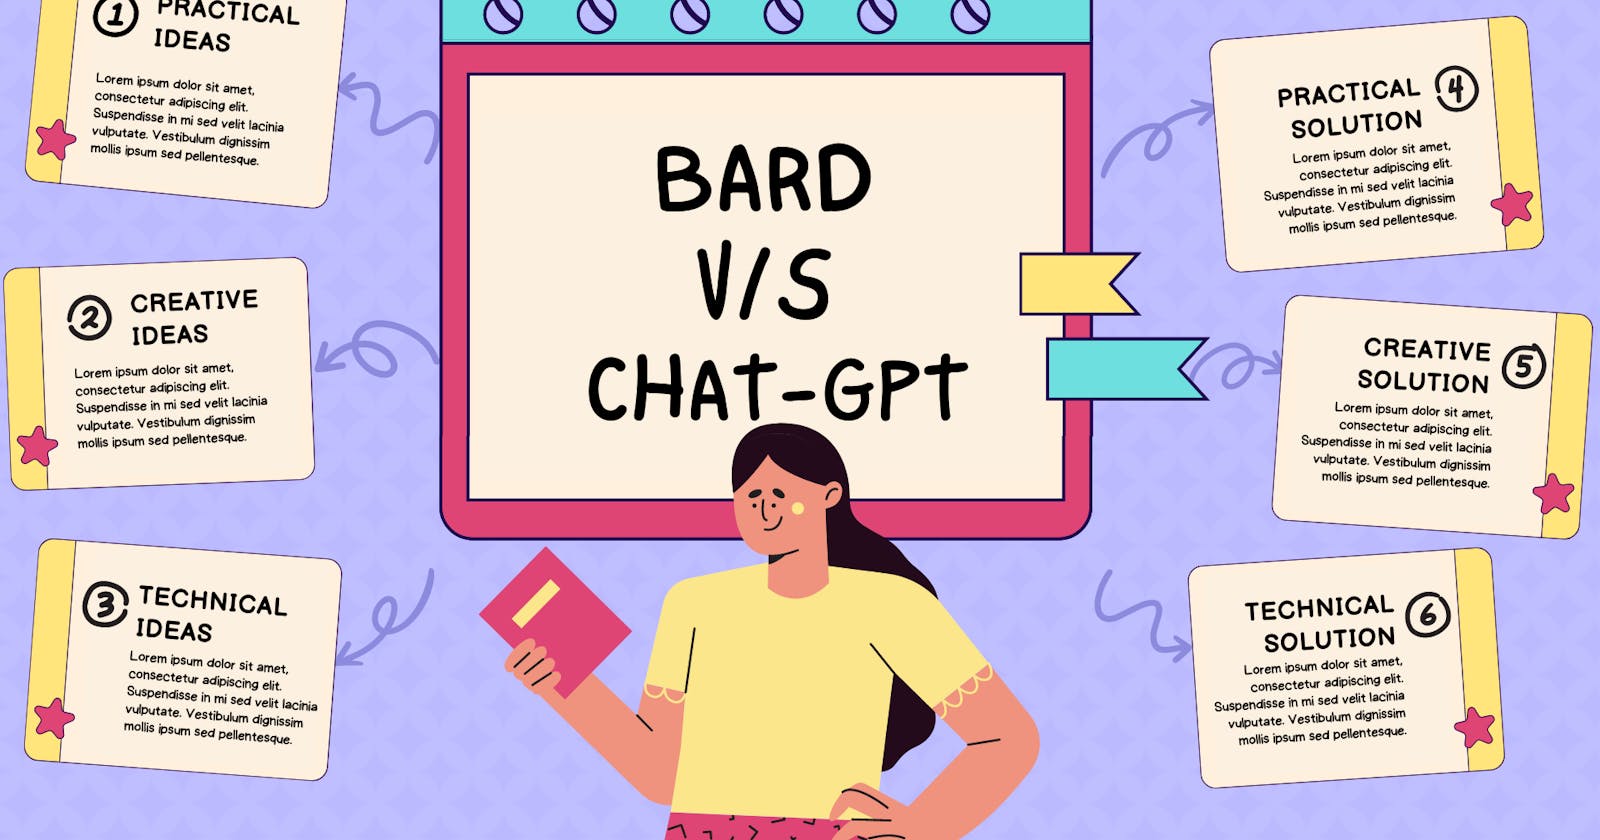 🤔 Can you explain the difference between 🤖ChatGPT and 🎭BARD?